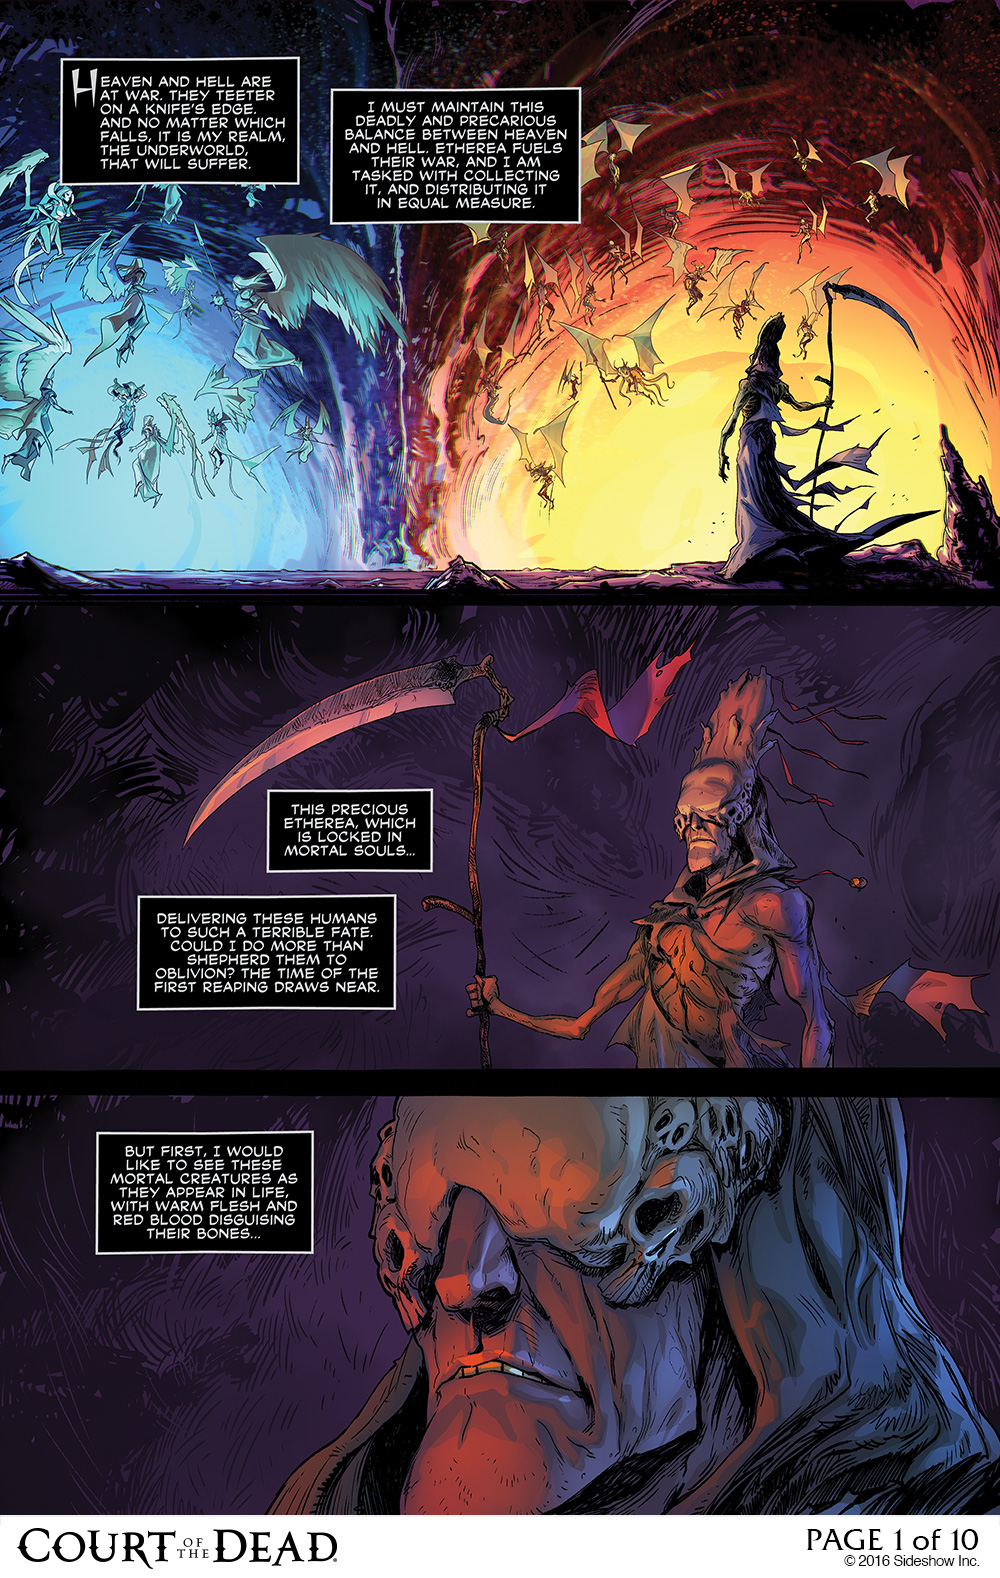 Discover The Battle For The Underworld In This Comic Preview For Court Of The Dead